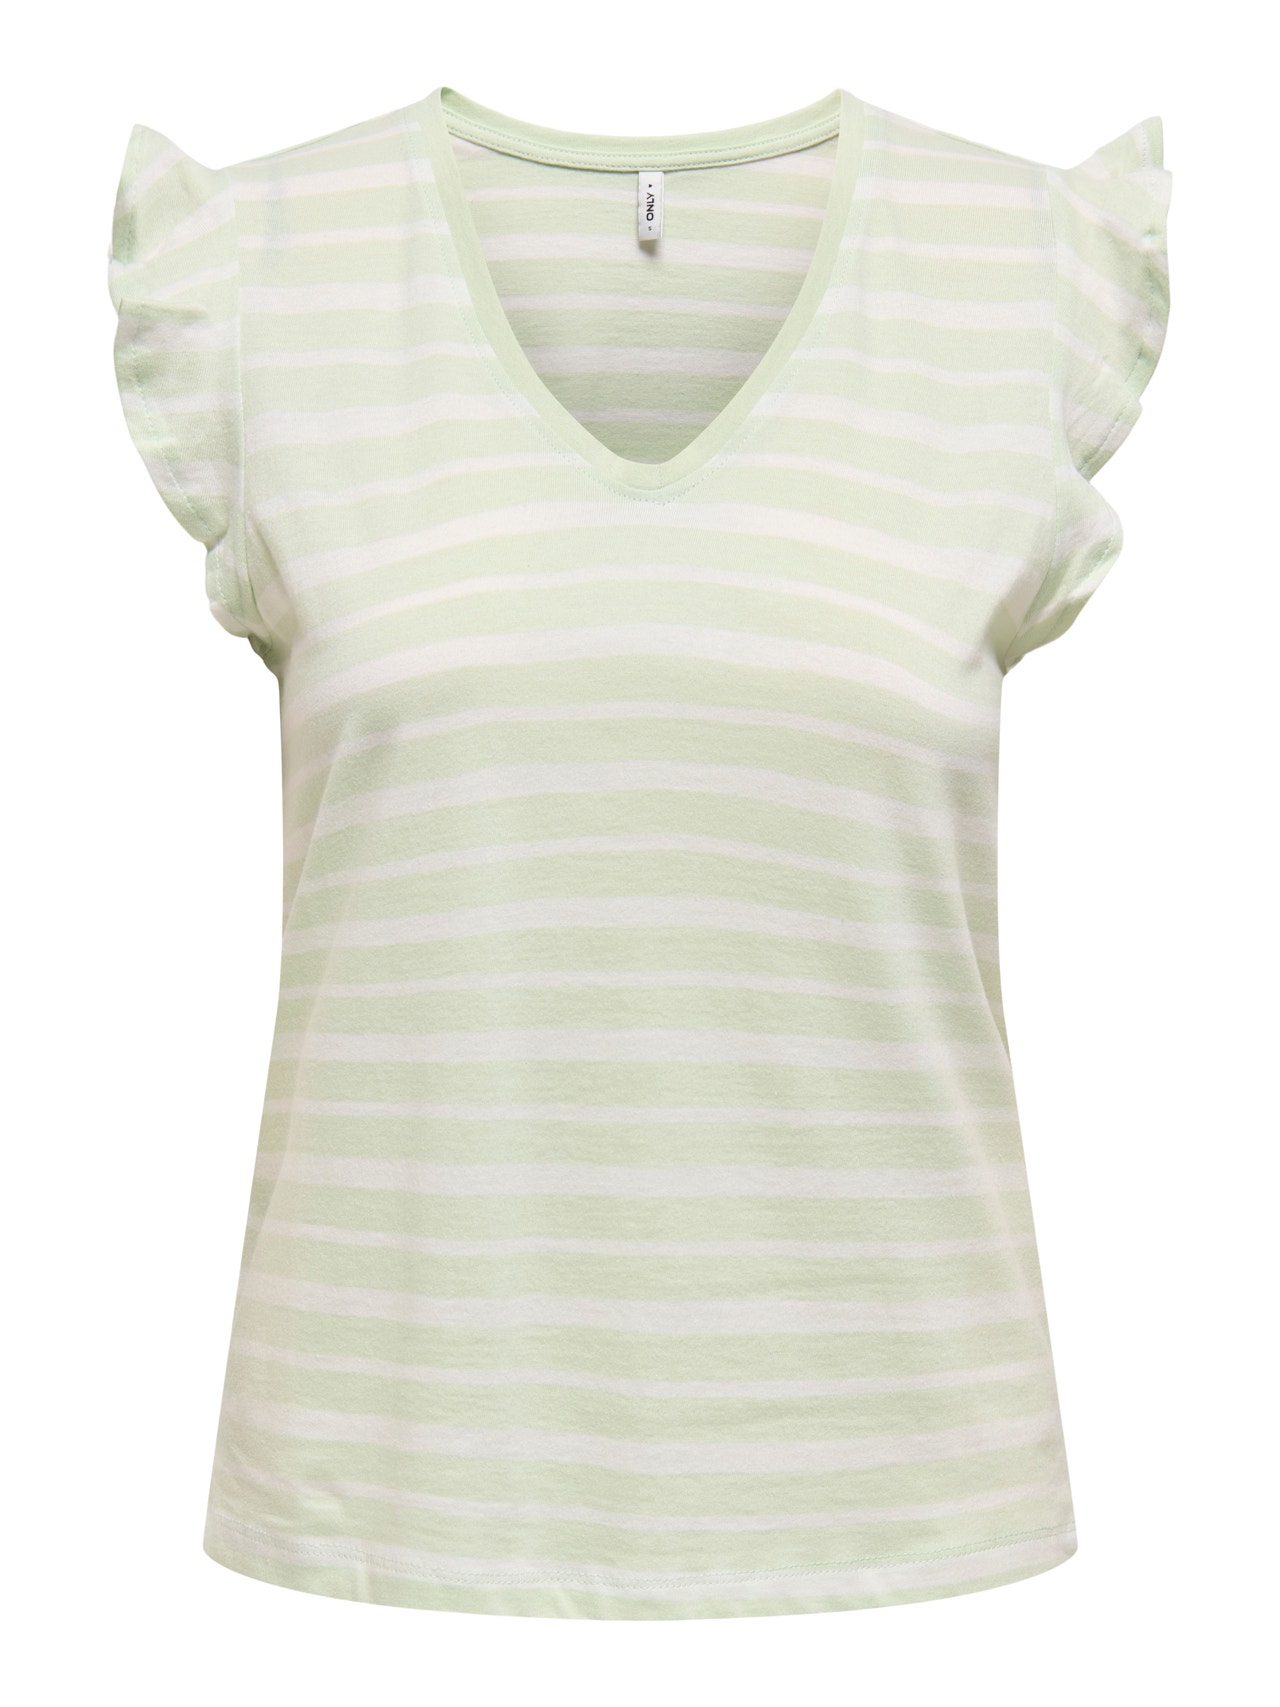 ONLY V-neck Ruffle Top -Subtle Green - 15252469